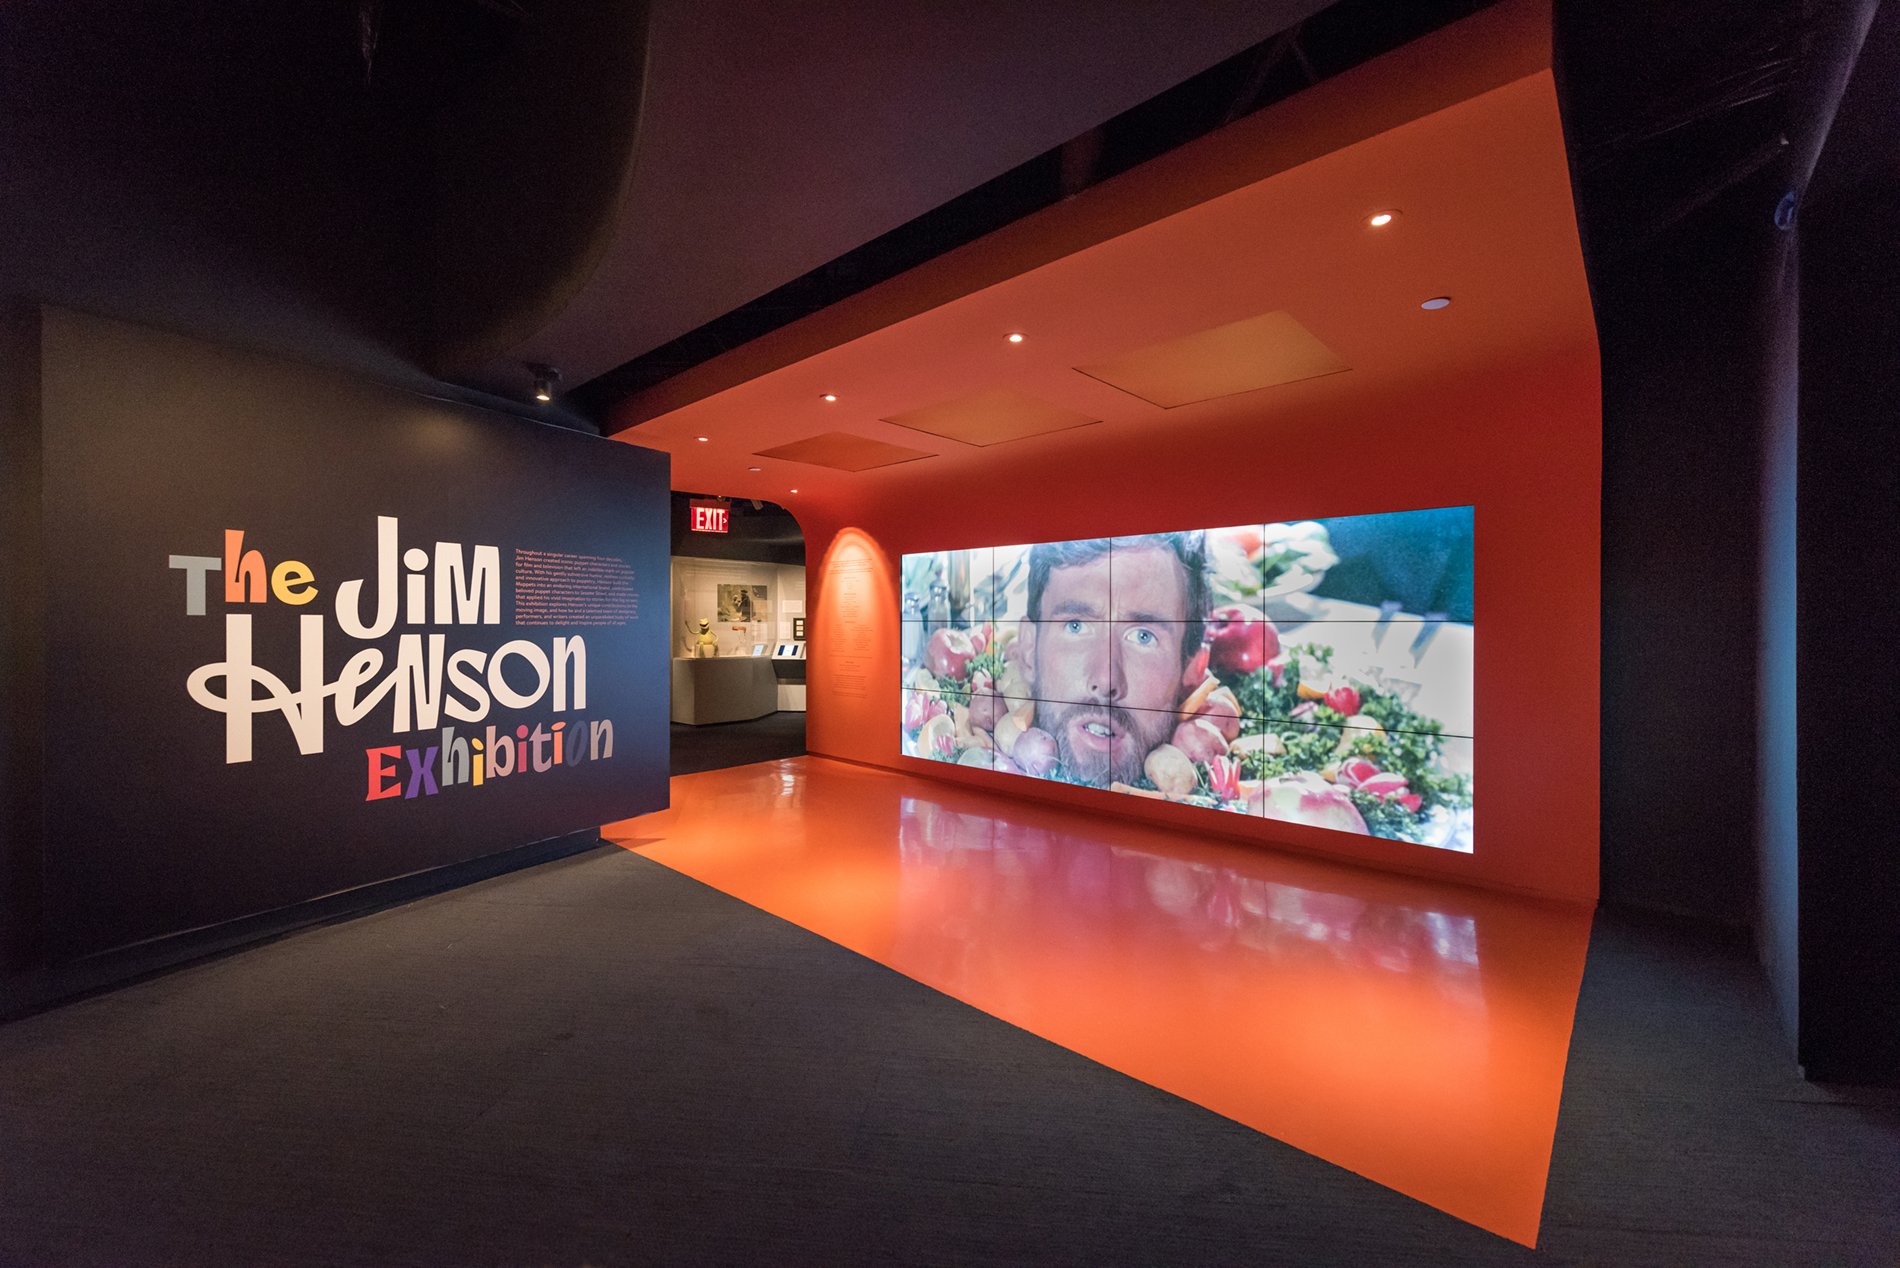 Entry way to the Museum's Jim Henson Exhibition